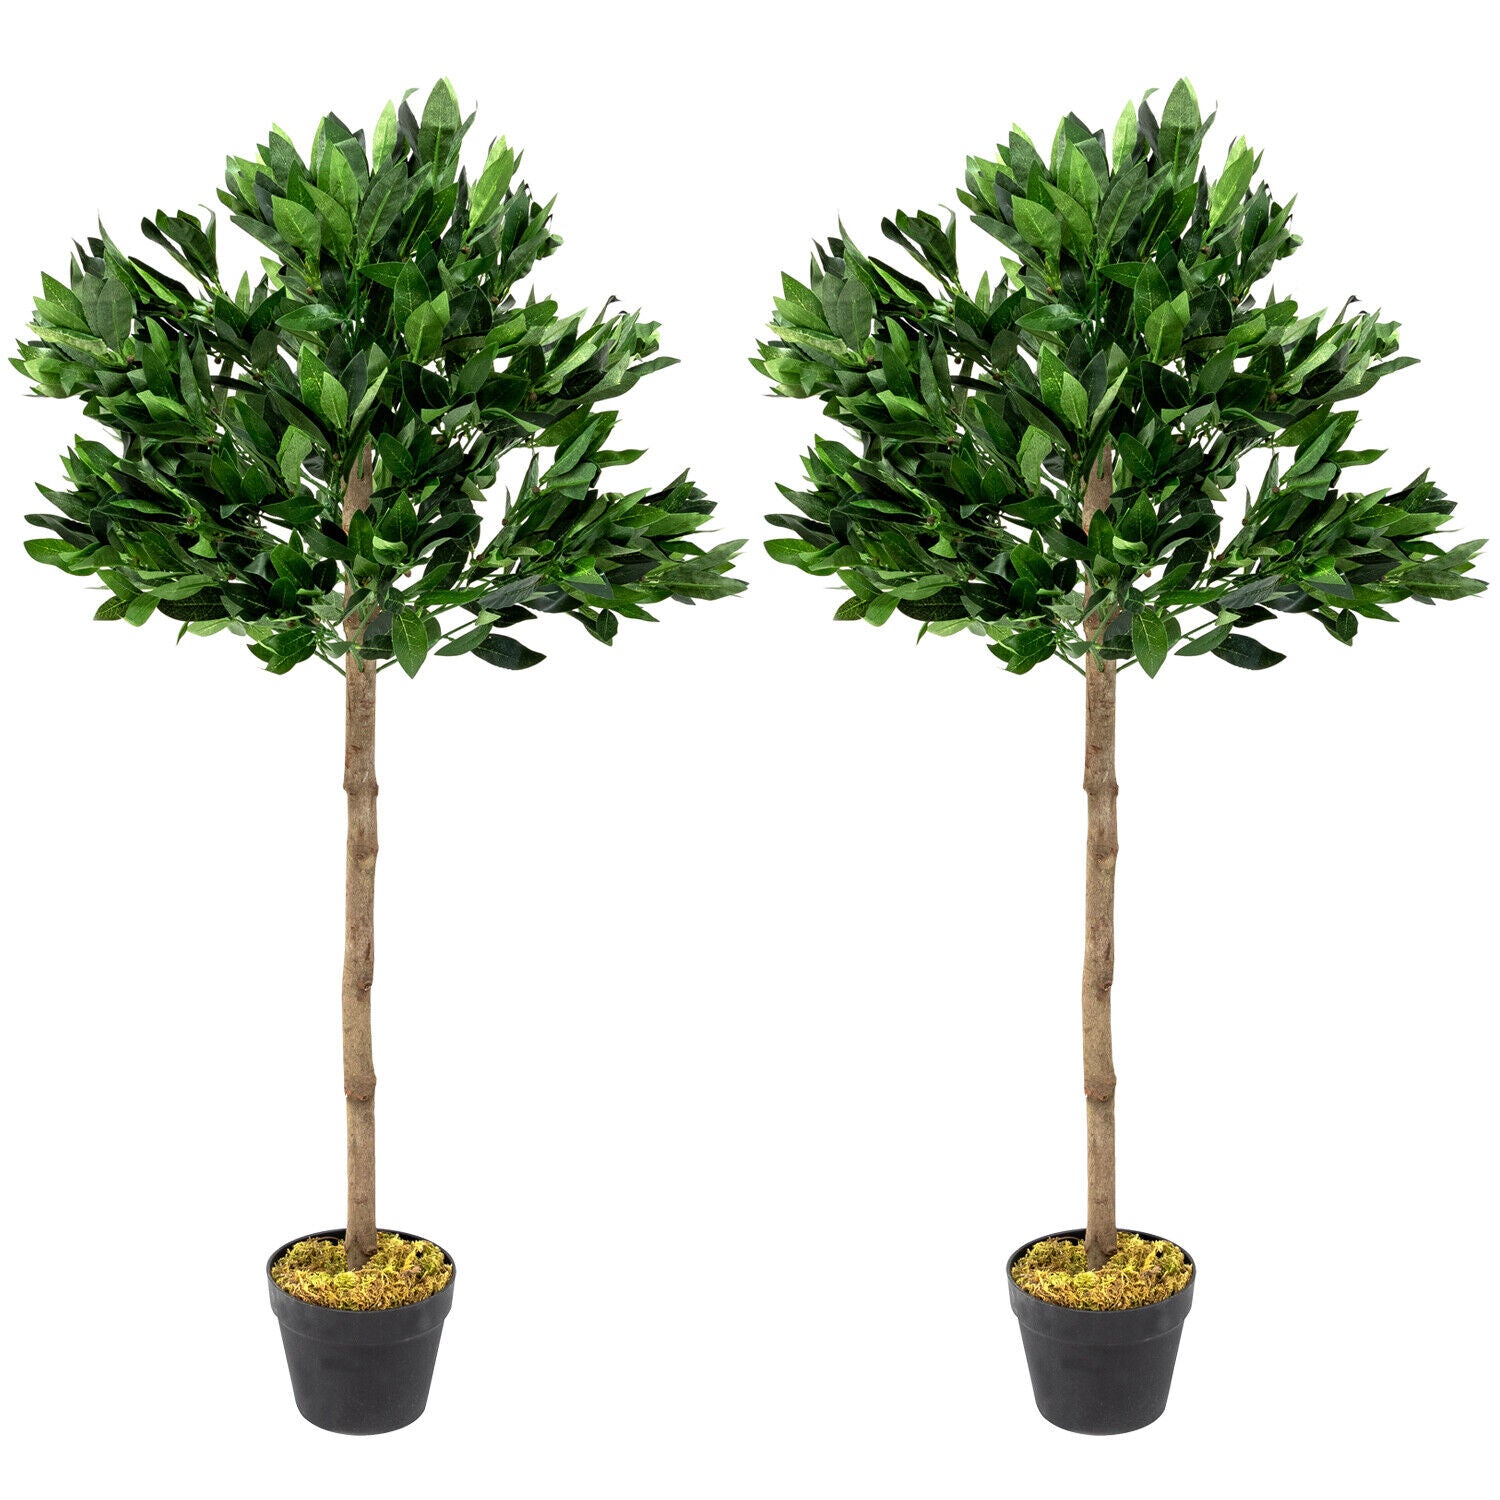 Woodside Artificial Topiary Bay Leaf Tree 4ft Indoor Outdoor Plant (pack of 2)